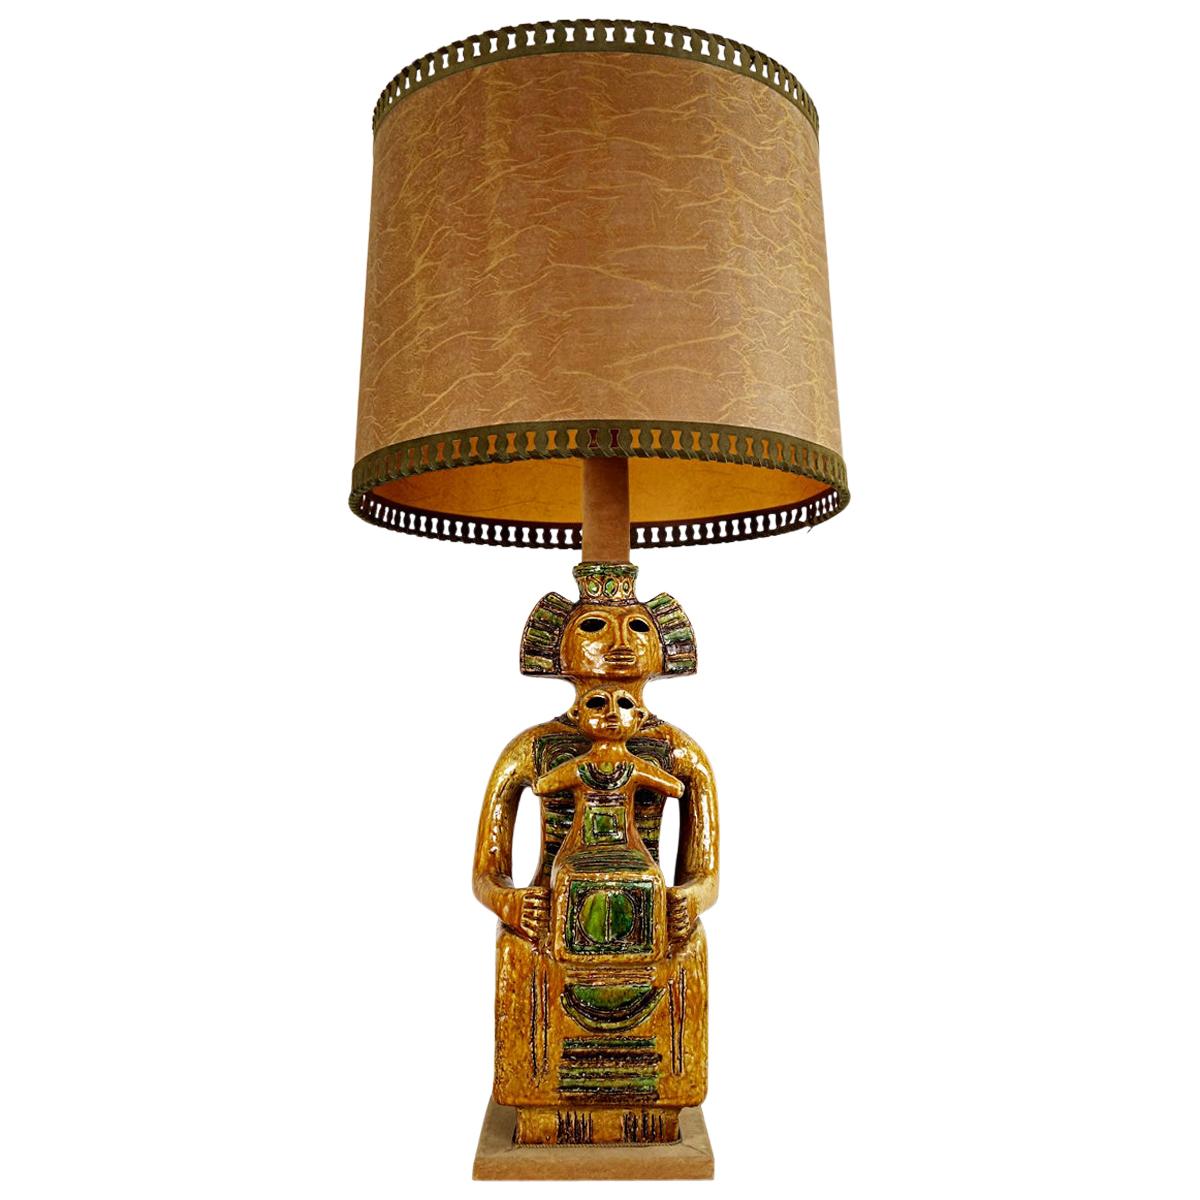 Impressive Ceramic Floor or Table Lamp in Mystic and Majestic Mayan Style For Sale